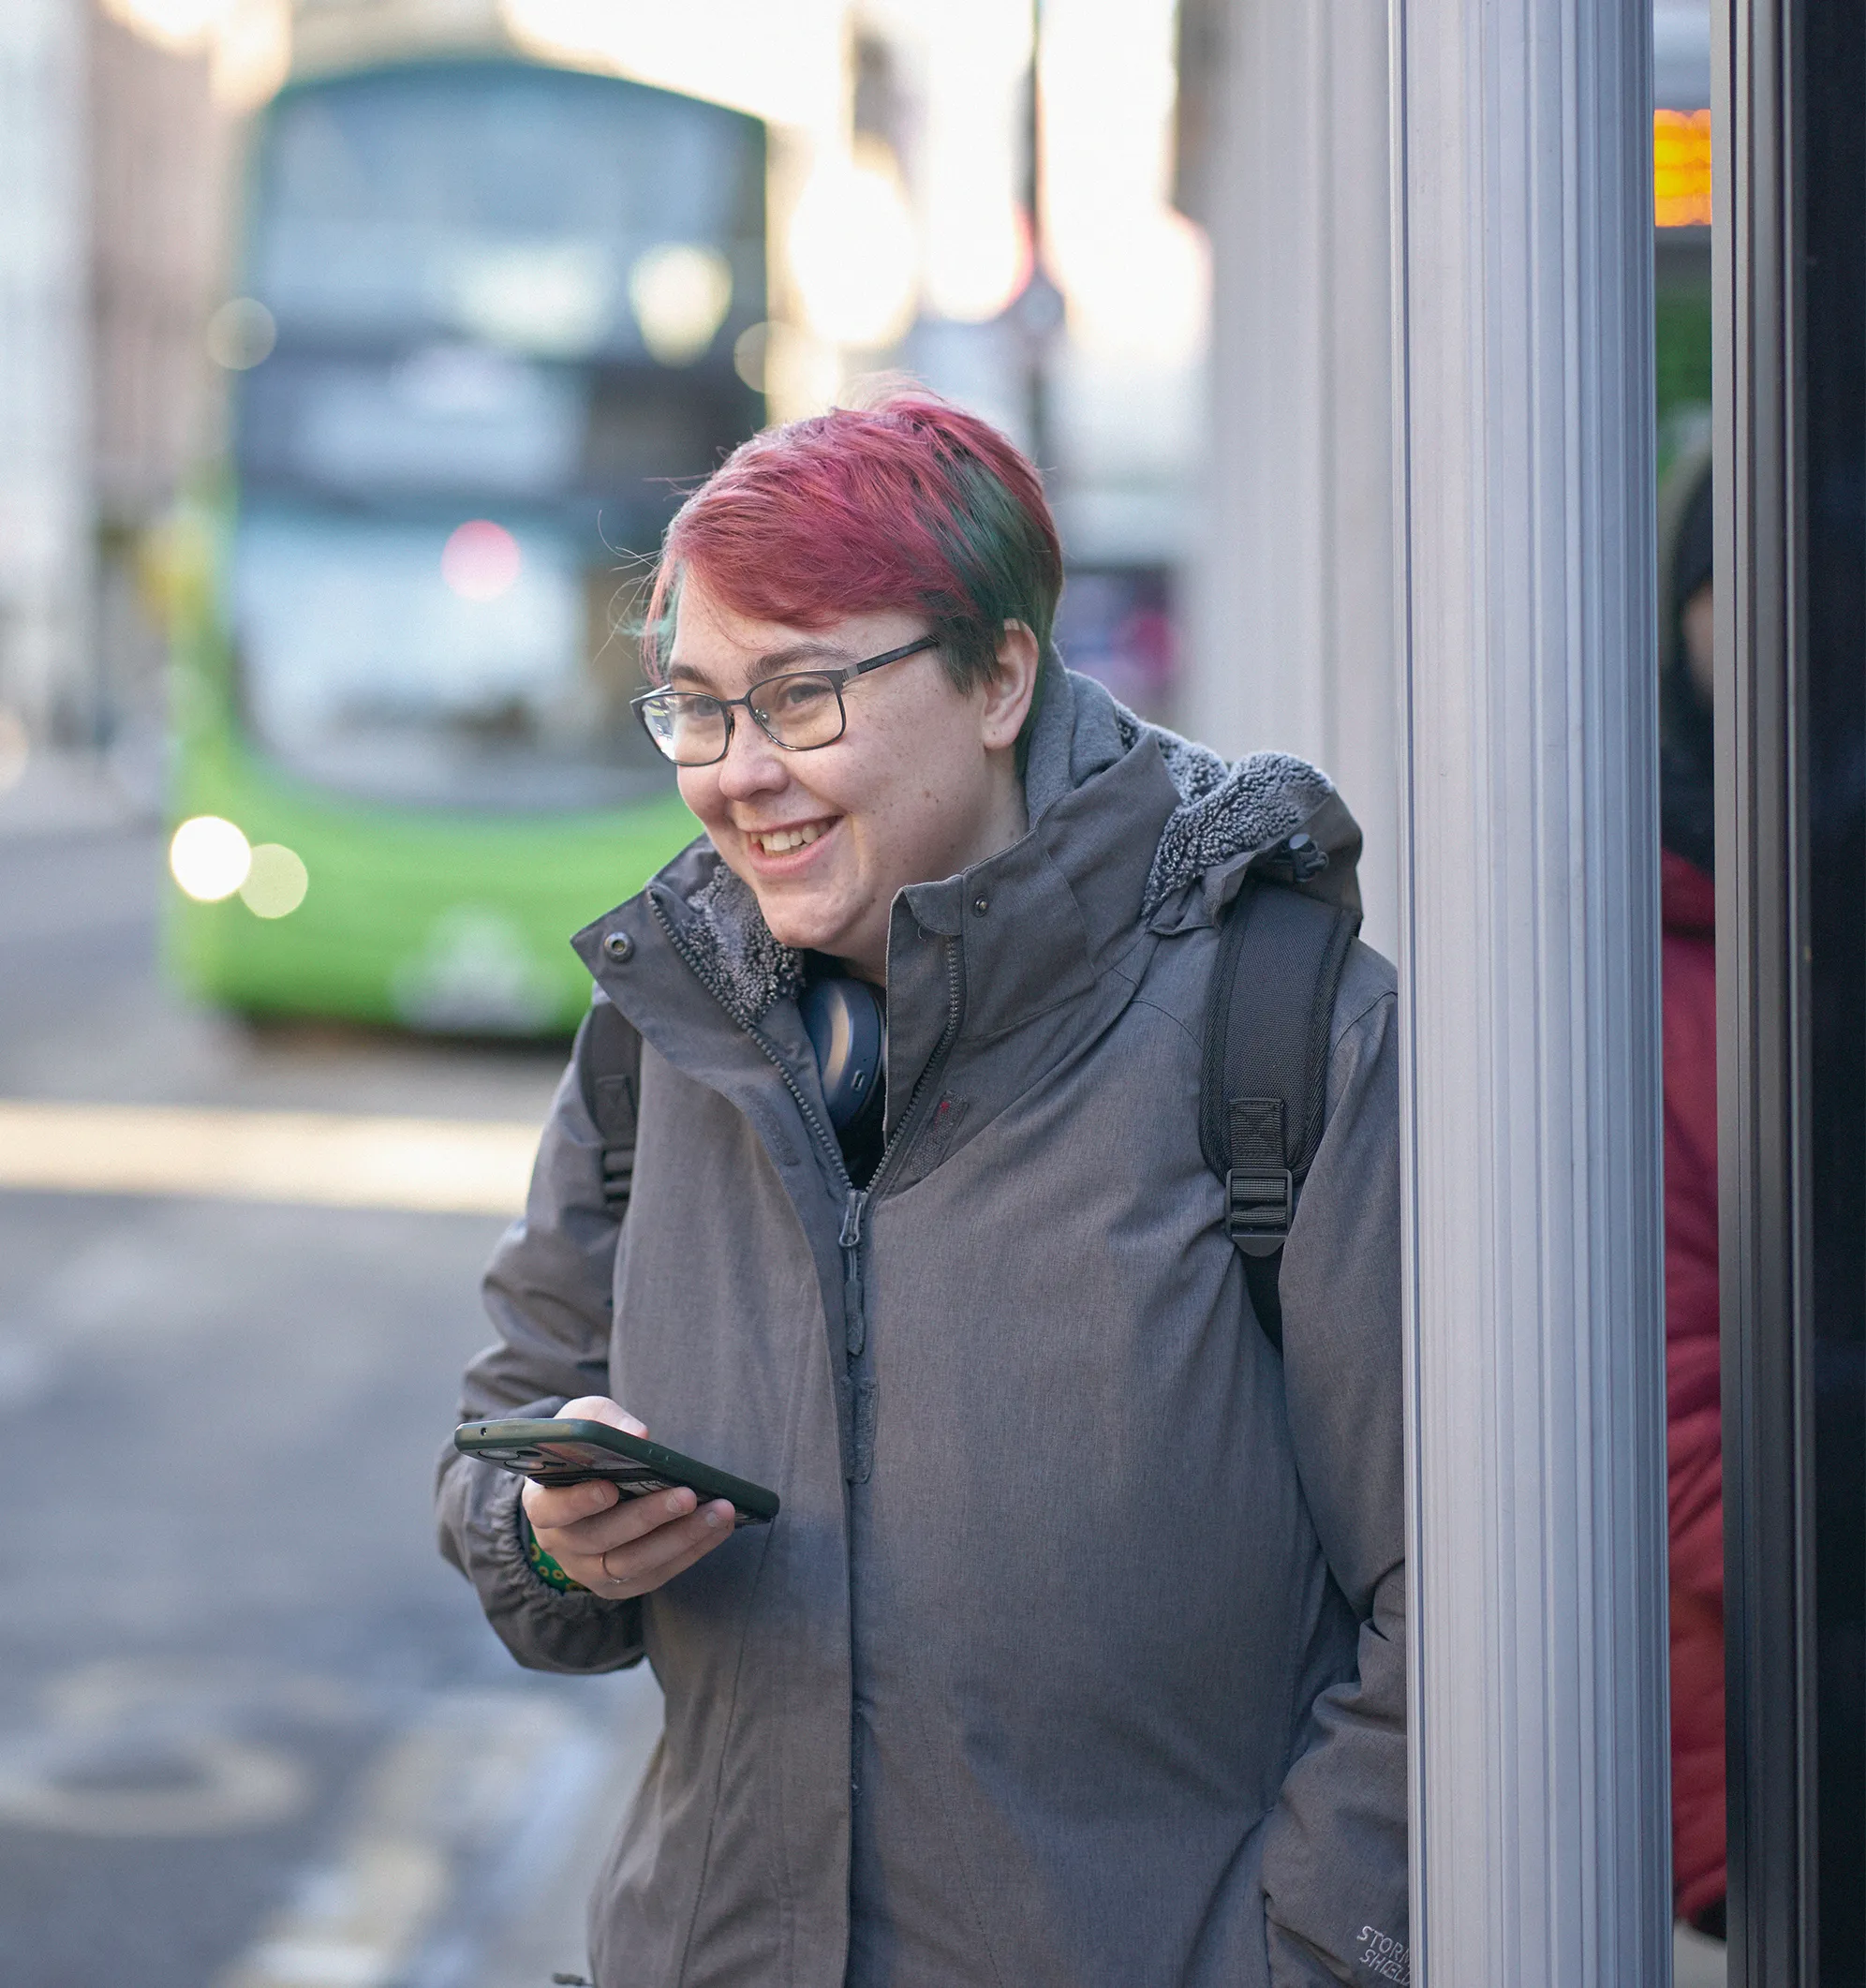 Student waits at bus stop in Leeds City Centre.